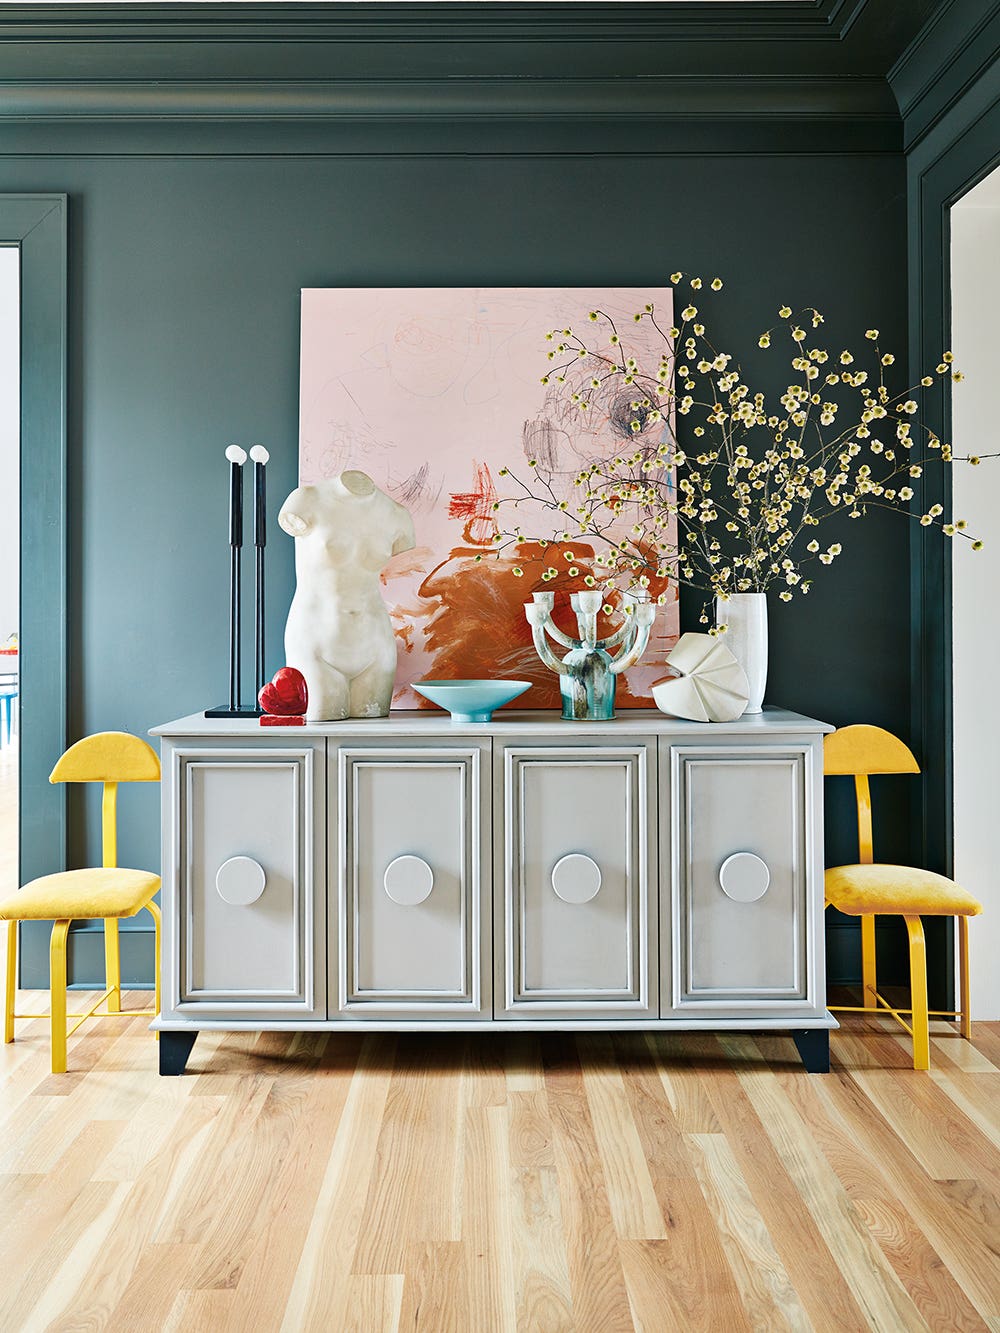 What Are the Next Big Paint Colors in 2019? 3 Millennials Have the Answer